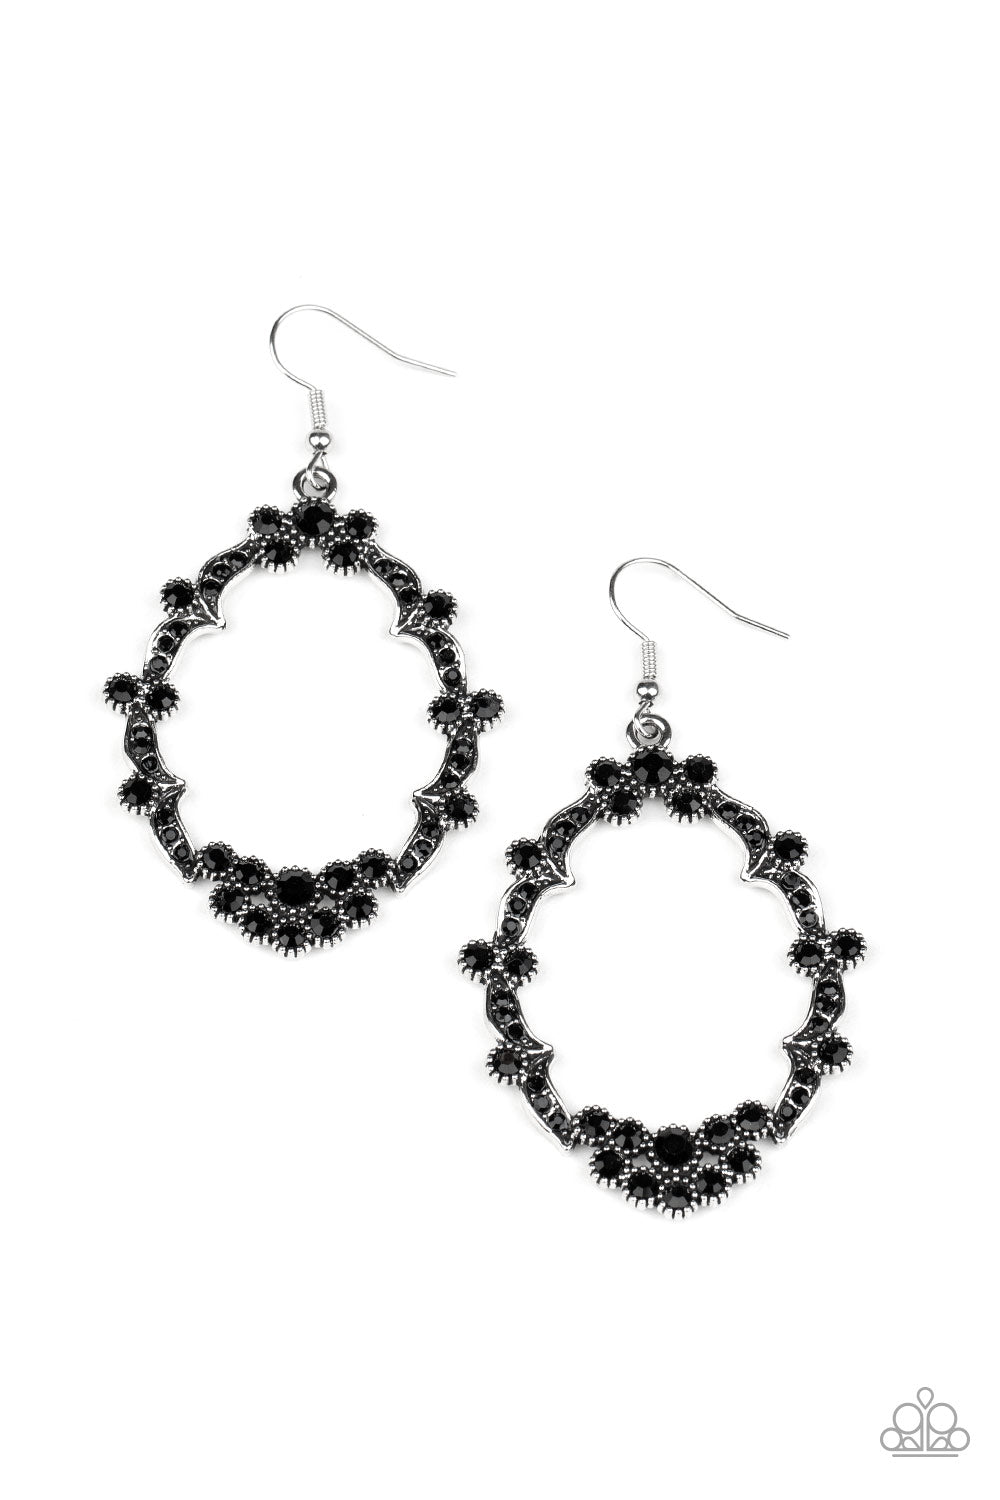 pittmanbling-and-jewelry-inc-presentssparkly-status-black-earrings-paparazzi-accessories